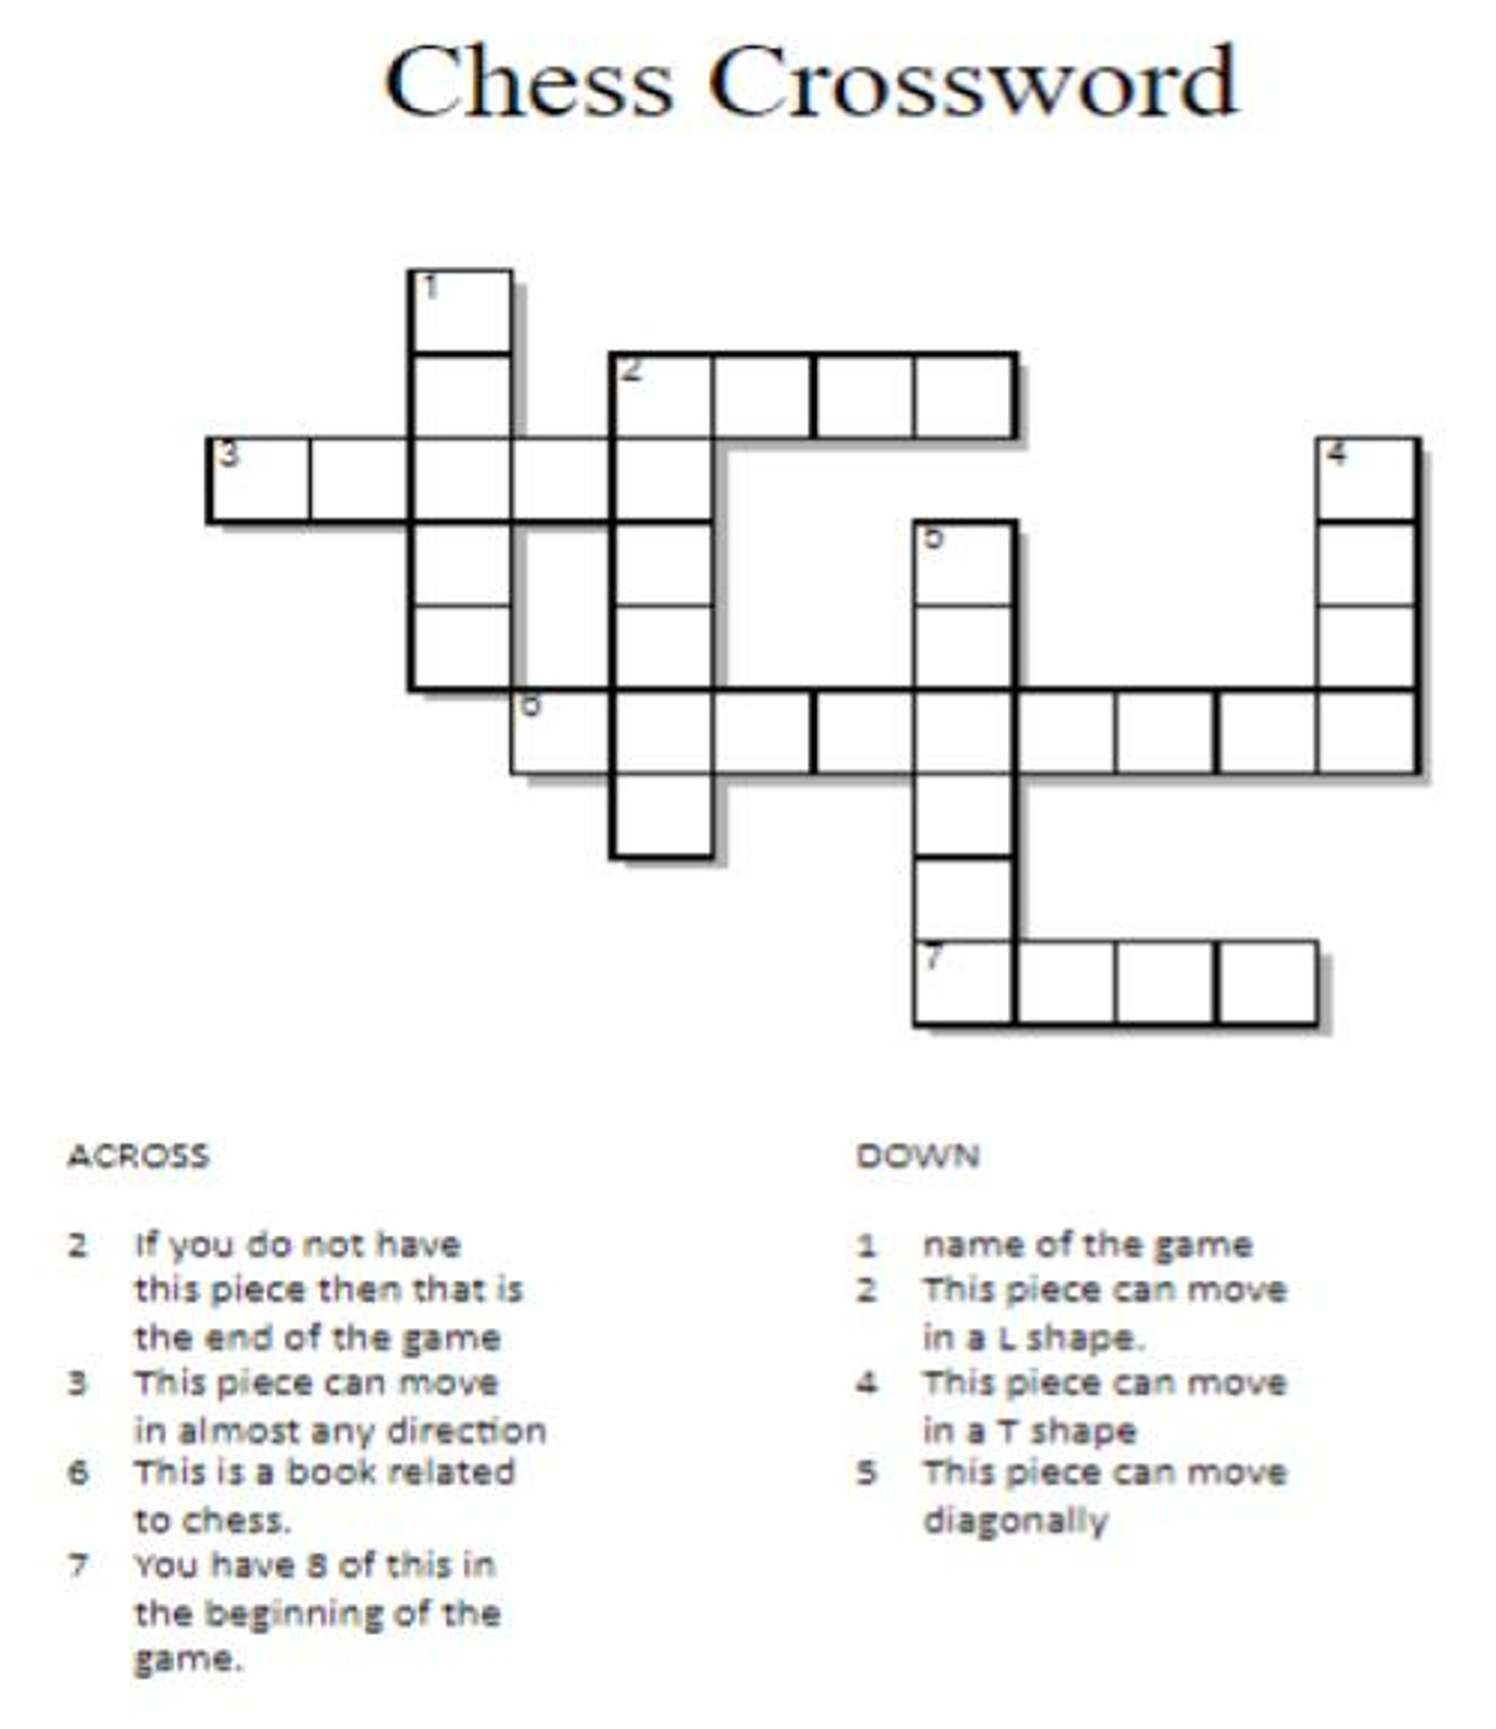 Cara: Like Puzzles? Try My Chess Crossword Puzzle 1 — Her Move Next